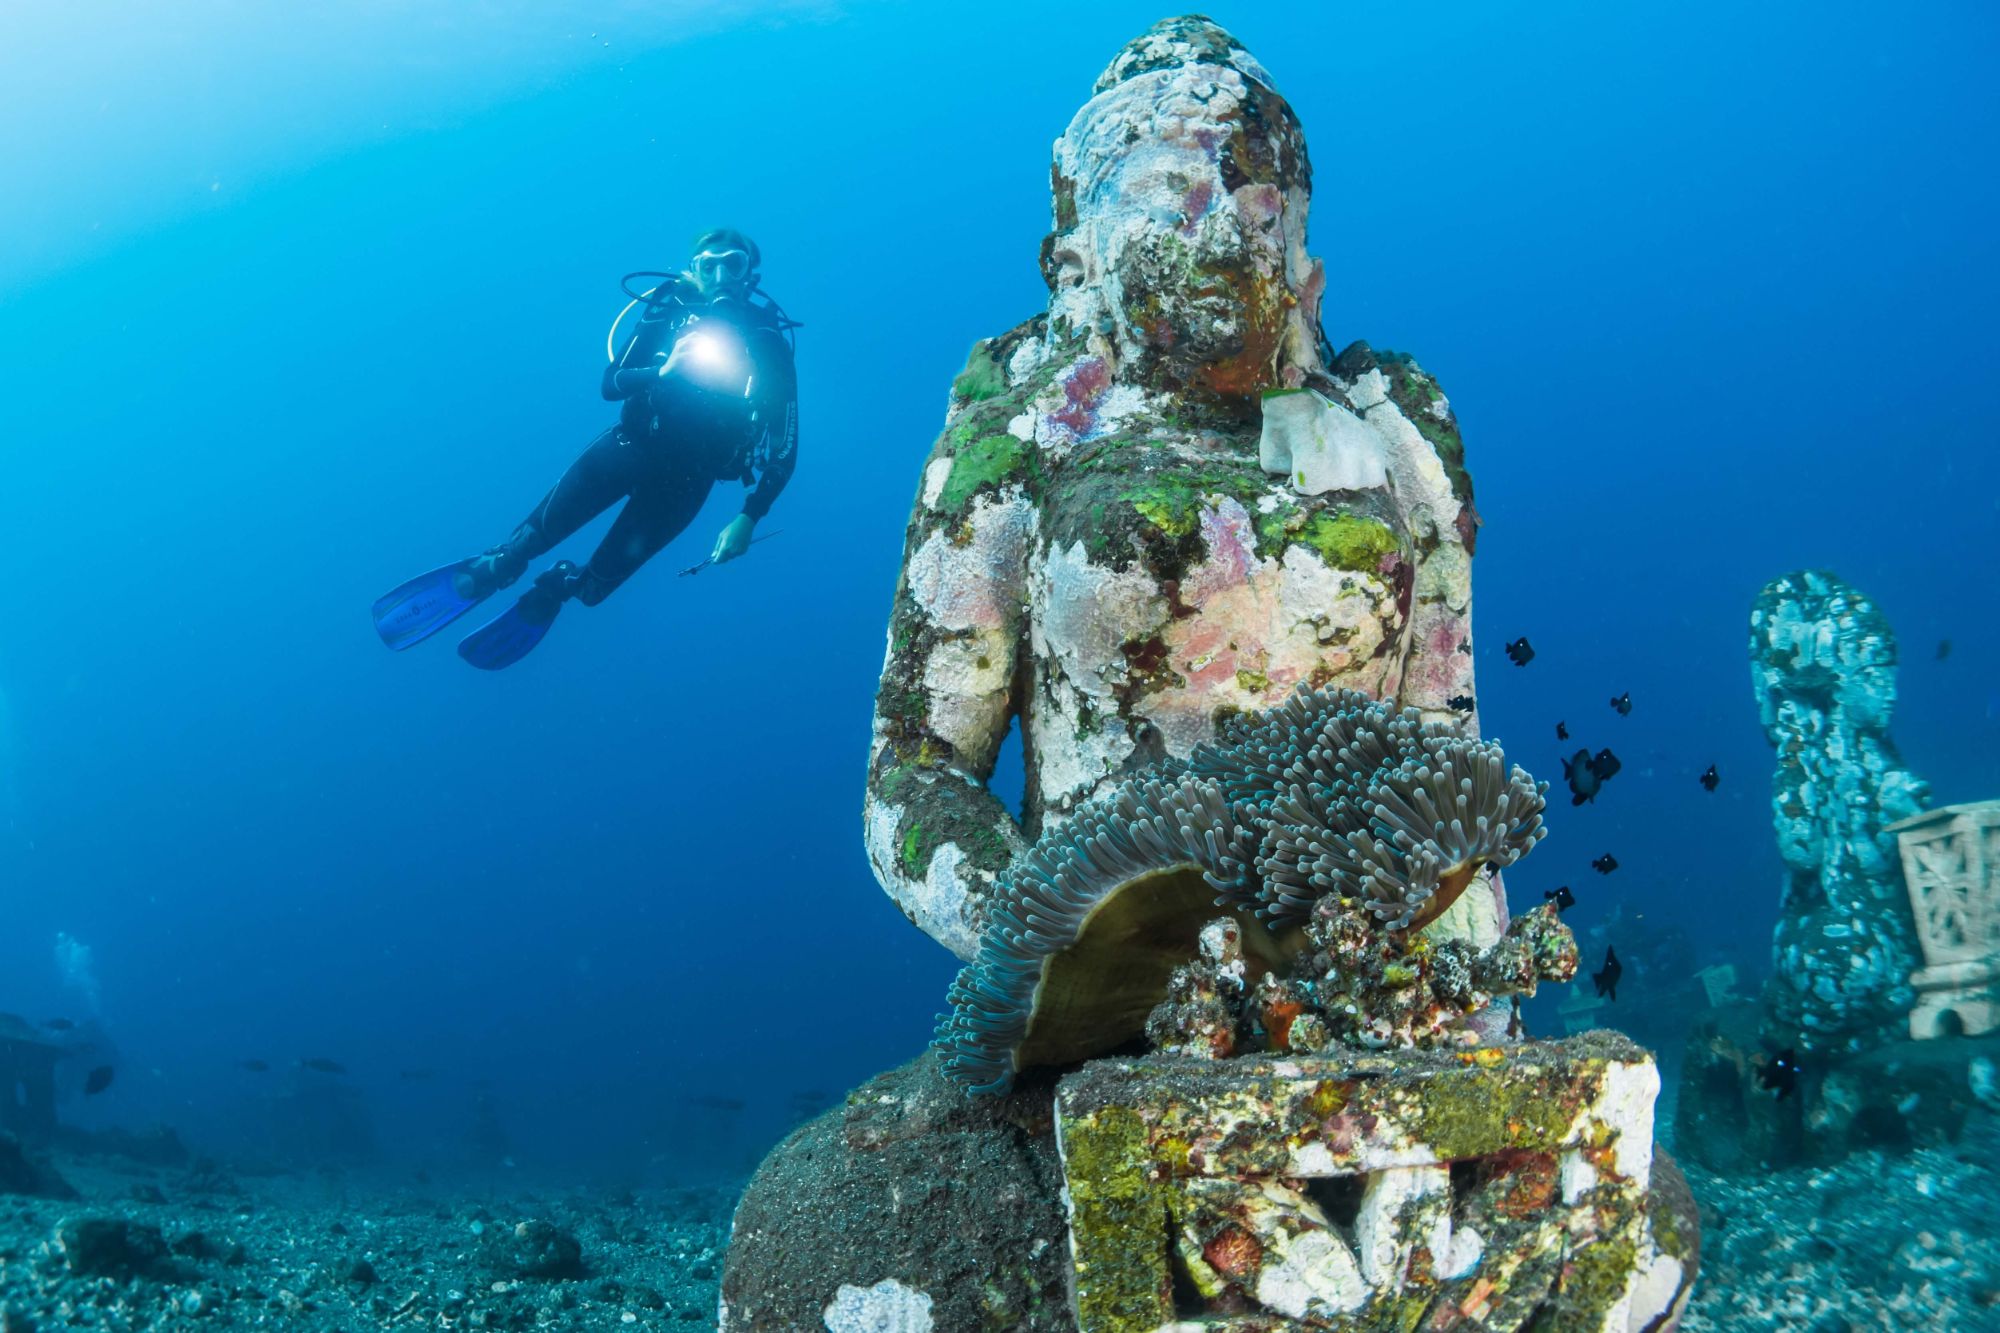 Scuba diver discovers an ancient statue under water